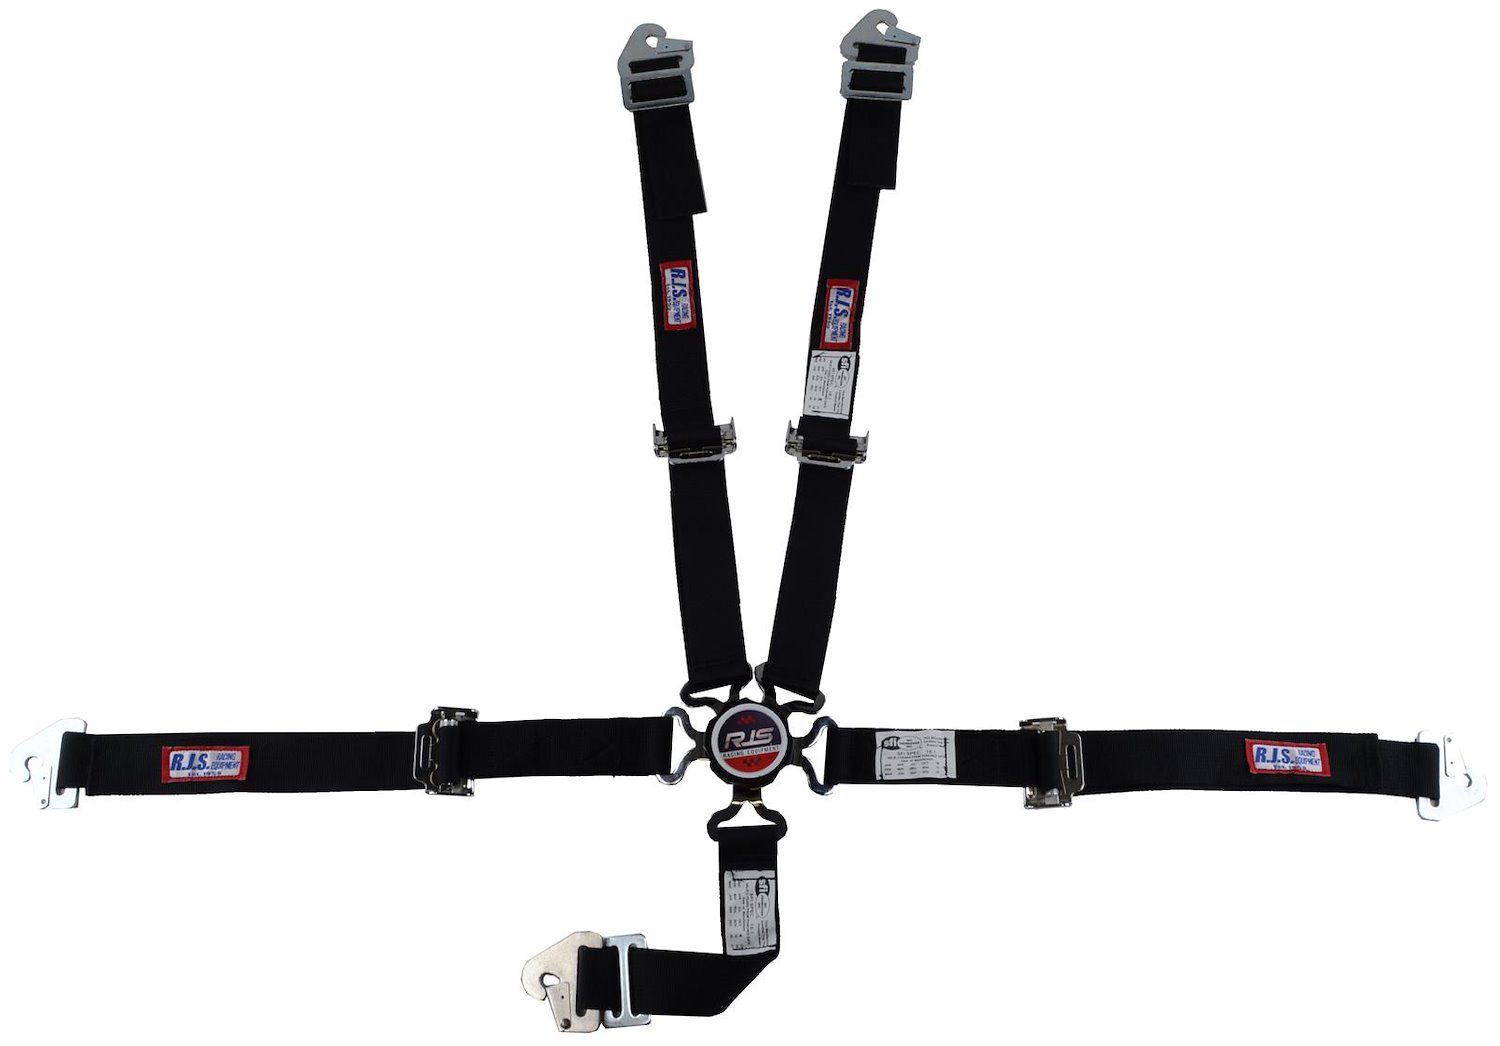 SFI 16.1 CAM-LOCK HARNESS 2 PULL UP Lap Belt 2 Shoulder Harness Individual ROLL BAR Mount 2 DOUBLE Sub ALL WRAP/BOLT ENDS GRAY